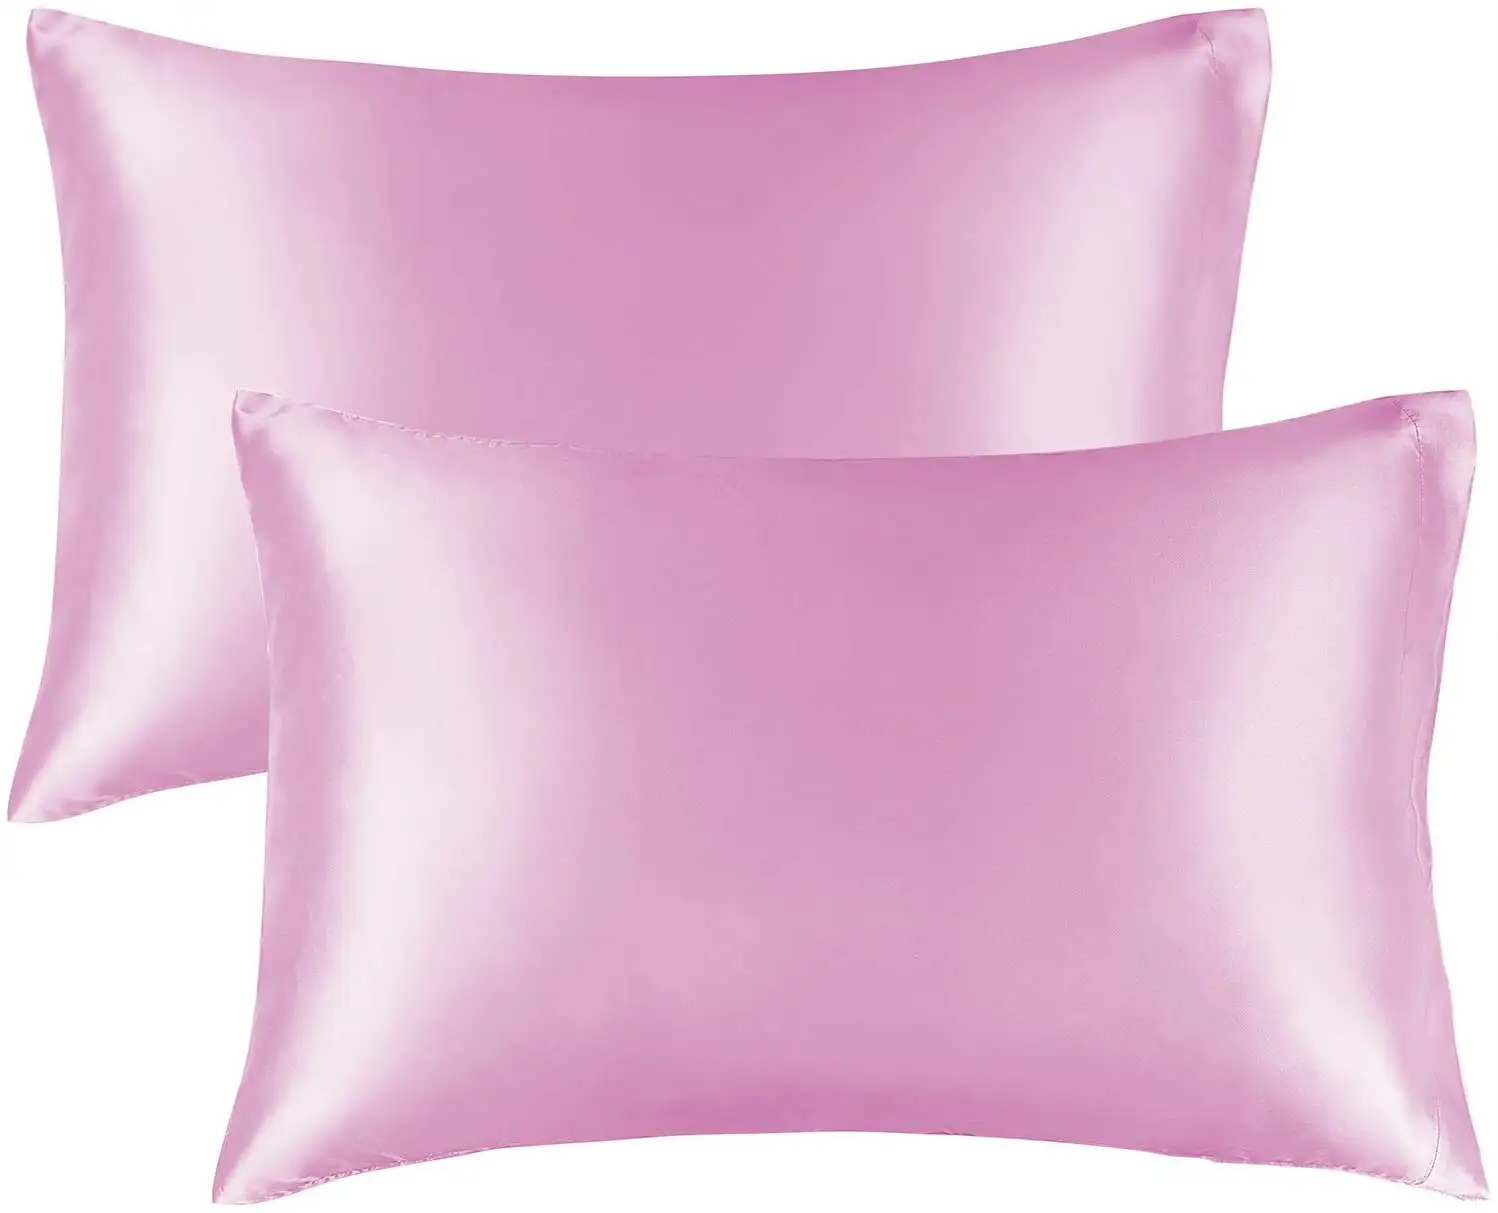 100% Natural Millbury Silk Pillow Cases Pink Pillow Cases Standard Size Soft Pillow Covers for Skin